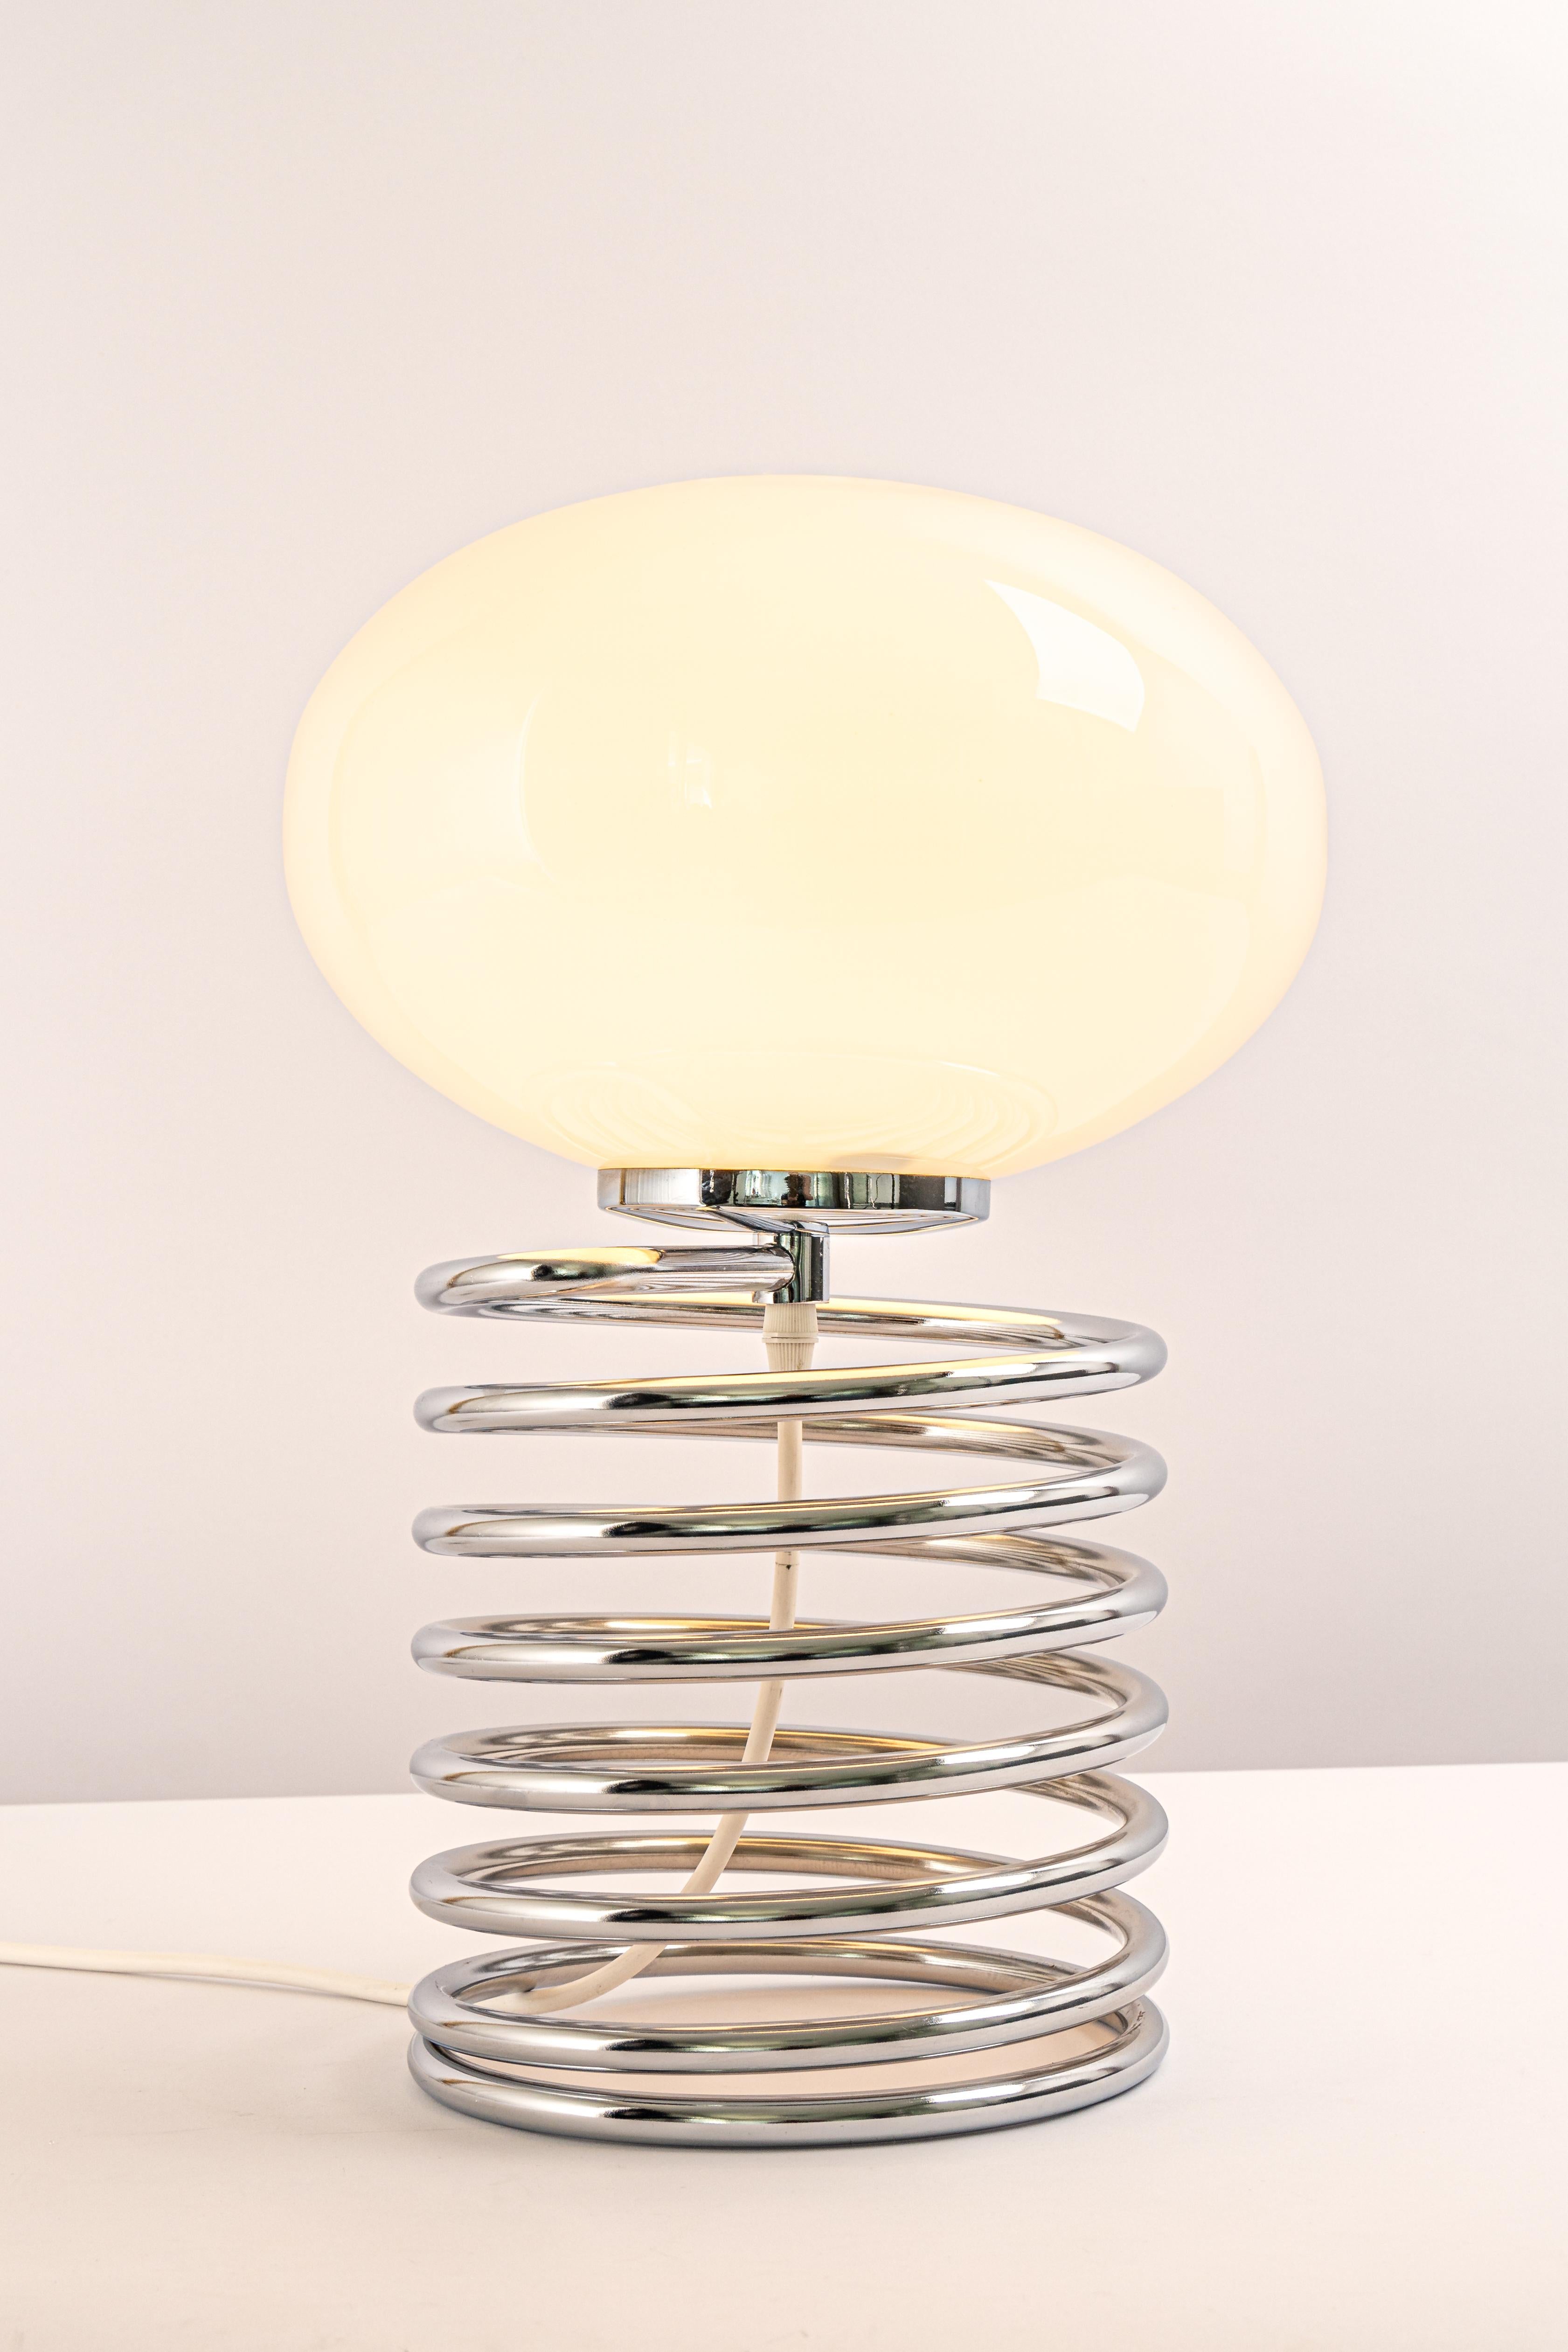 Late 20th Century 1 of 2 Stunning Design Spiral Table Lamp, Ingo Maurer, 1970s For Sale